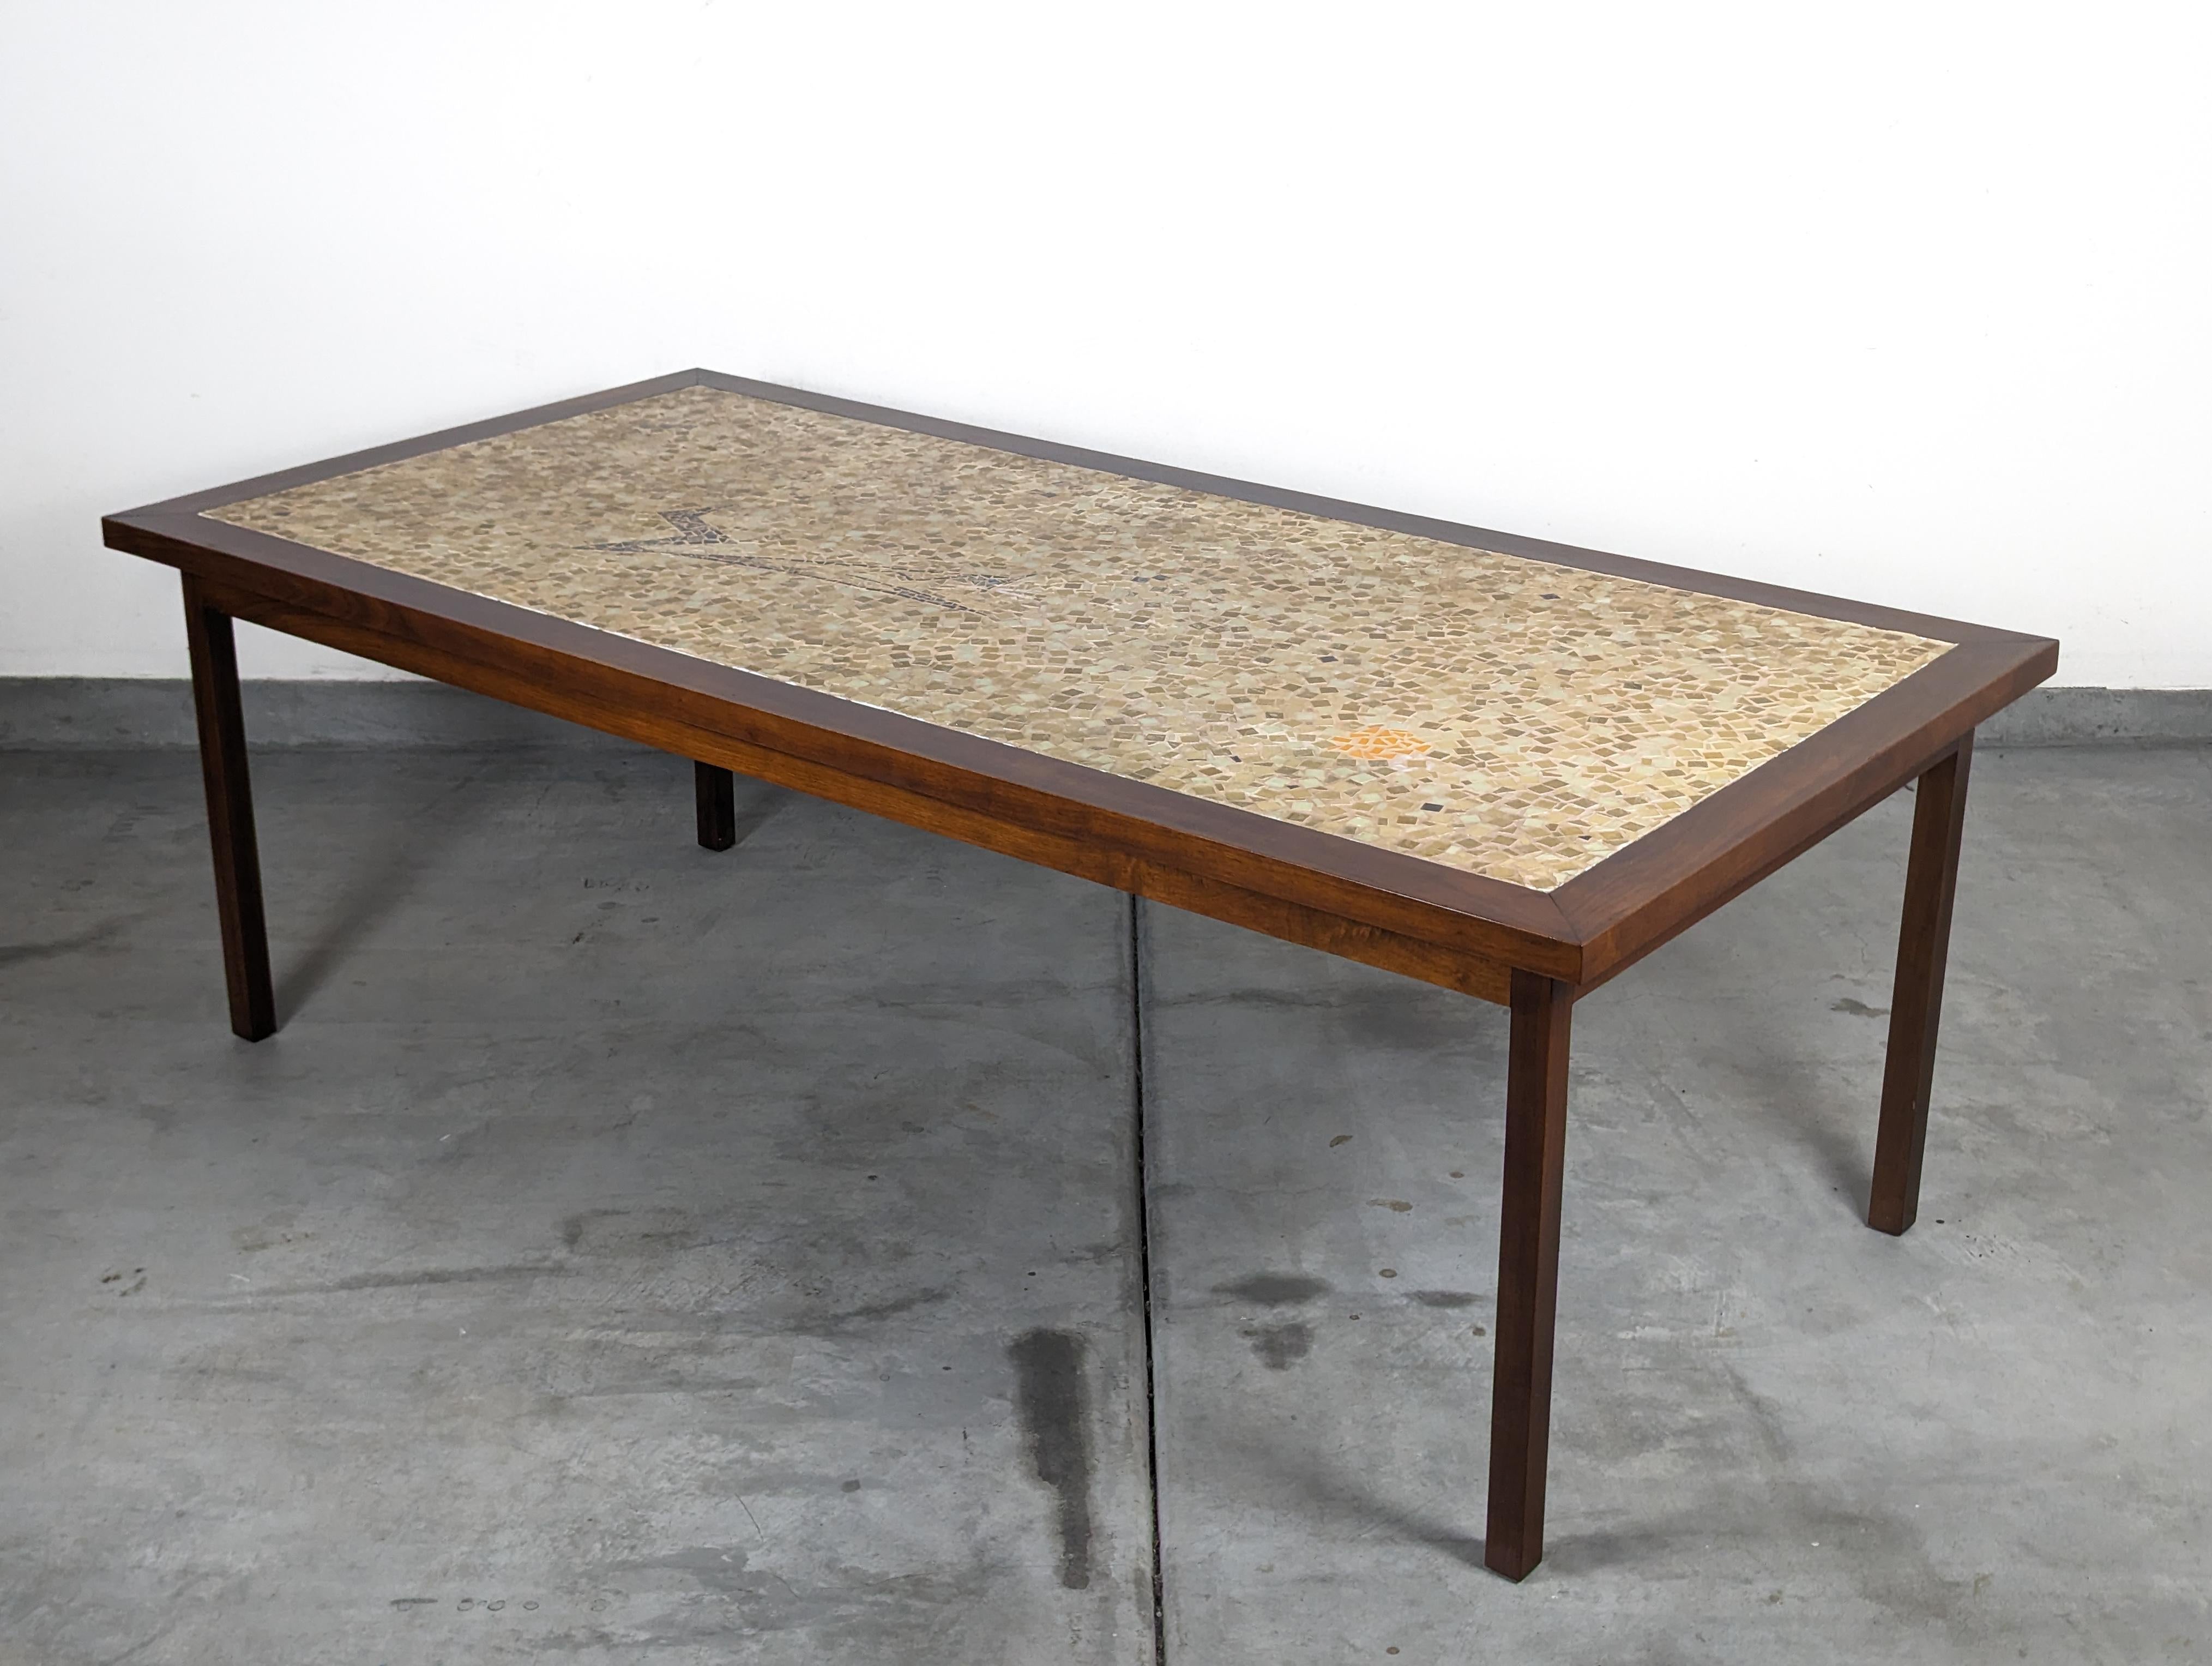 Mid Century Modern Walnut Dining Table with Mosaic Ceramic Tiled Top, c1970s For Sale 2